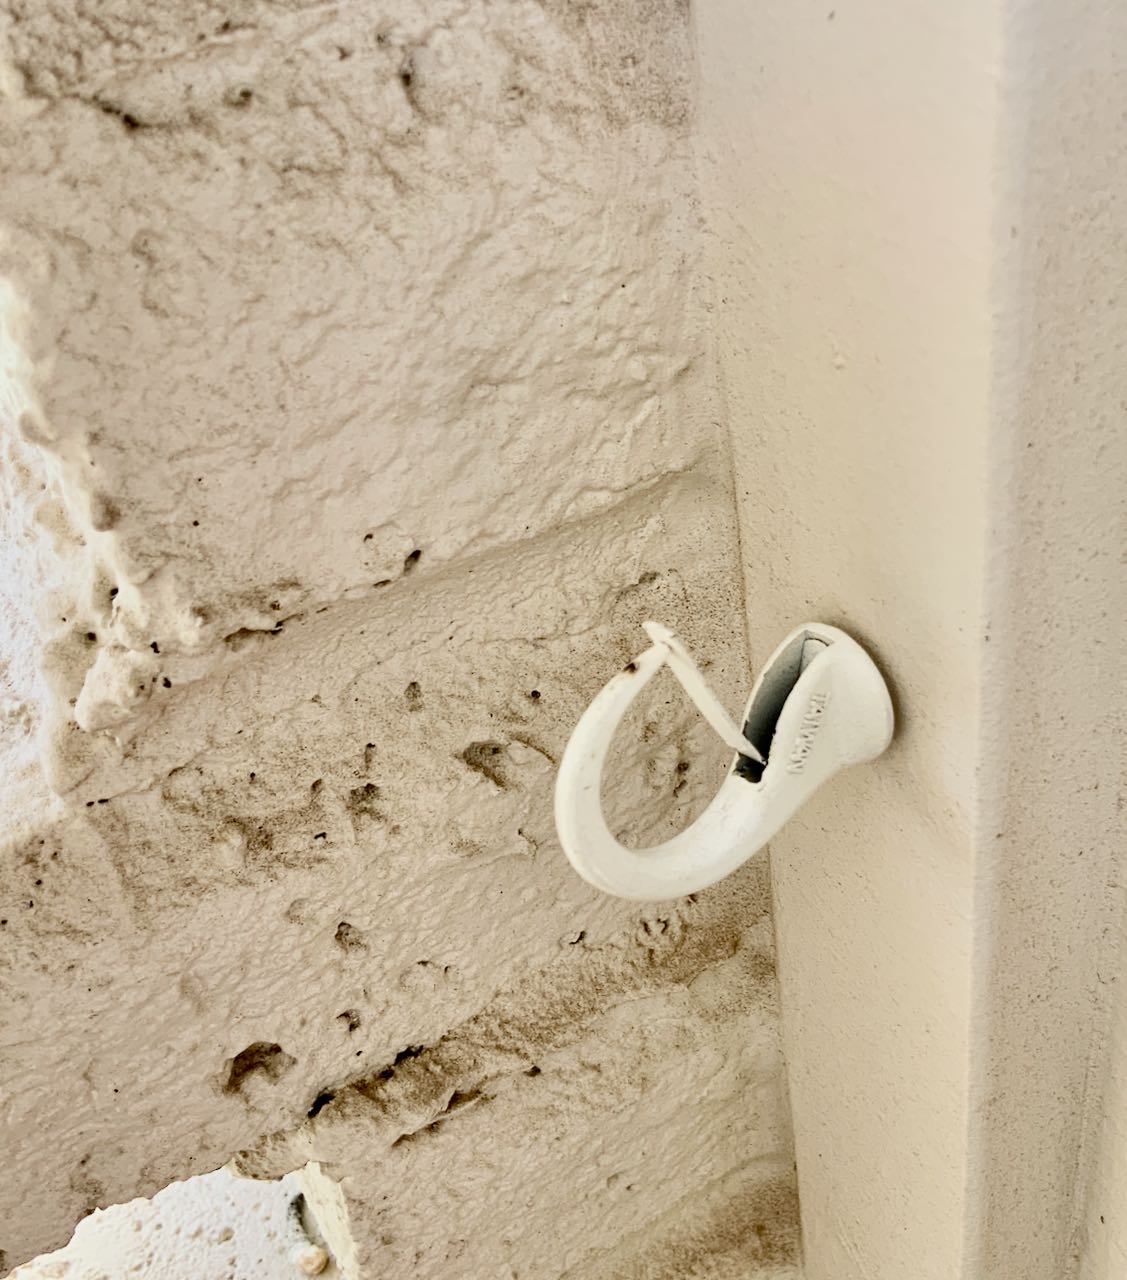 secure cup hook is screwed into the wall